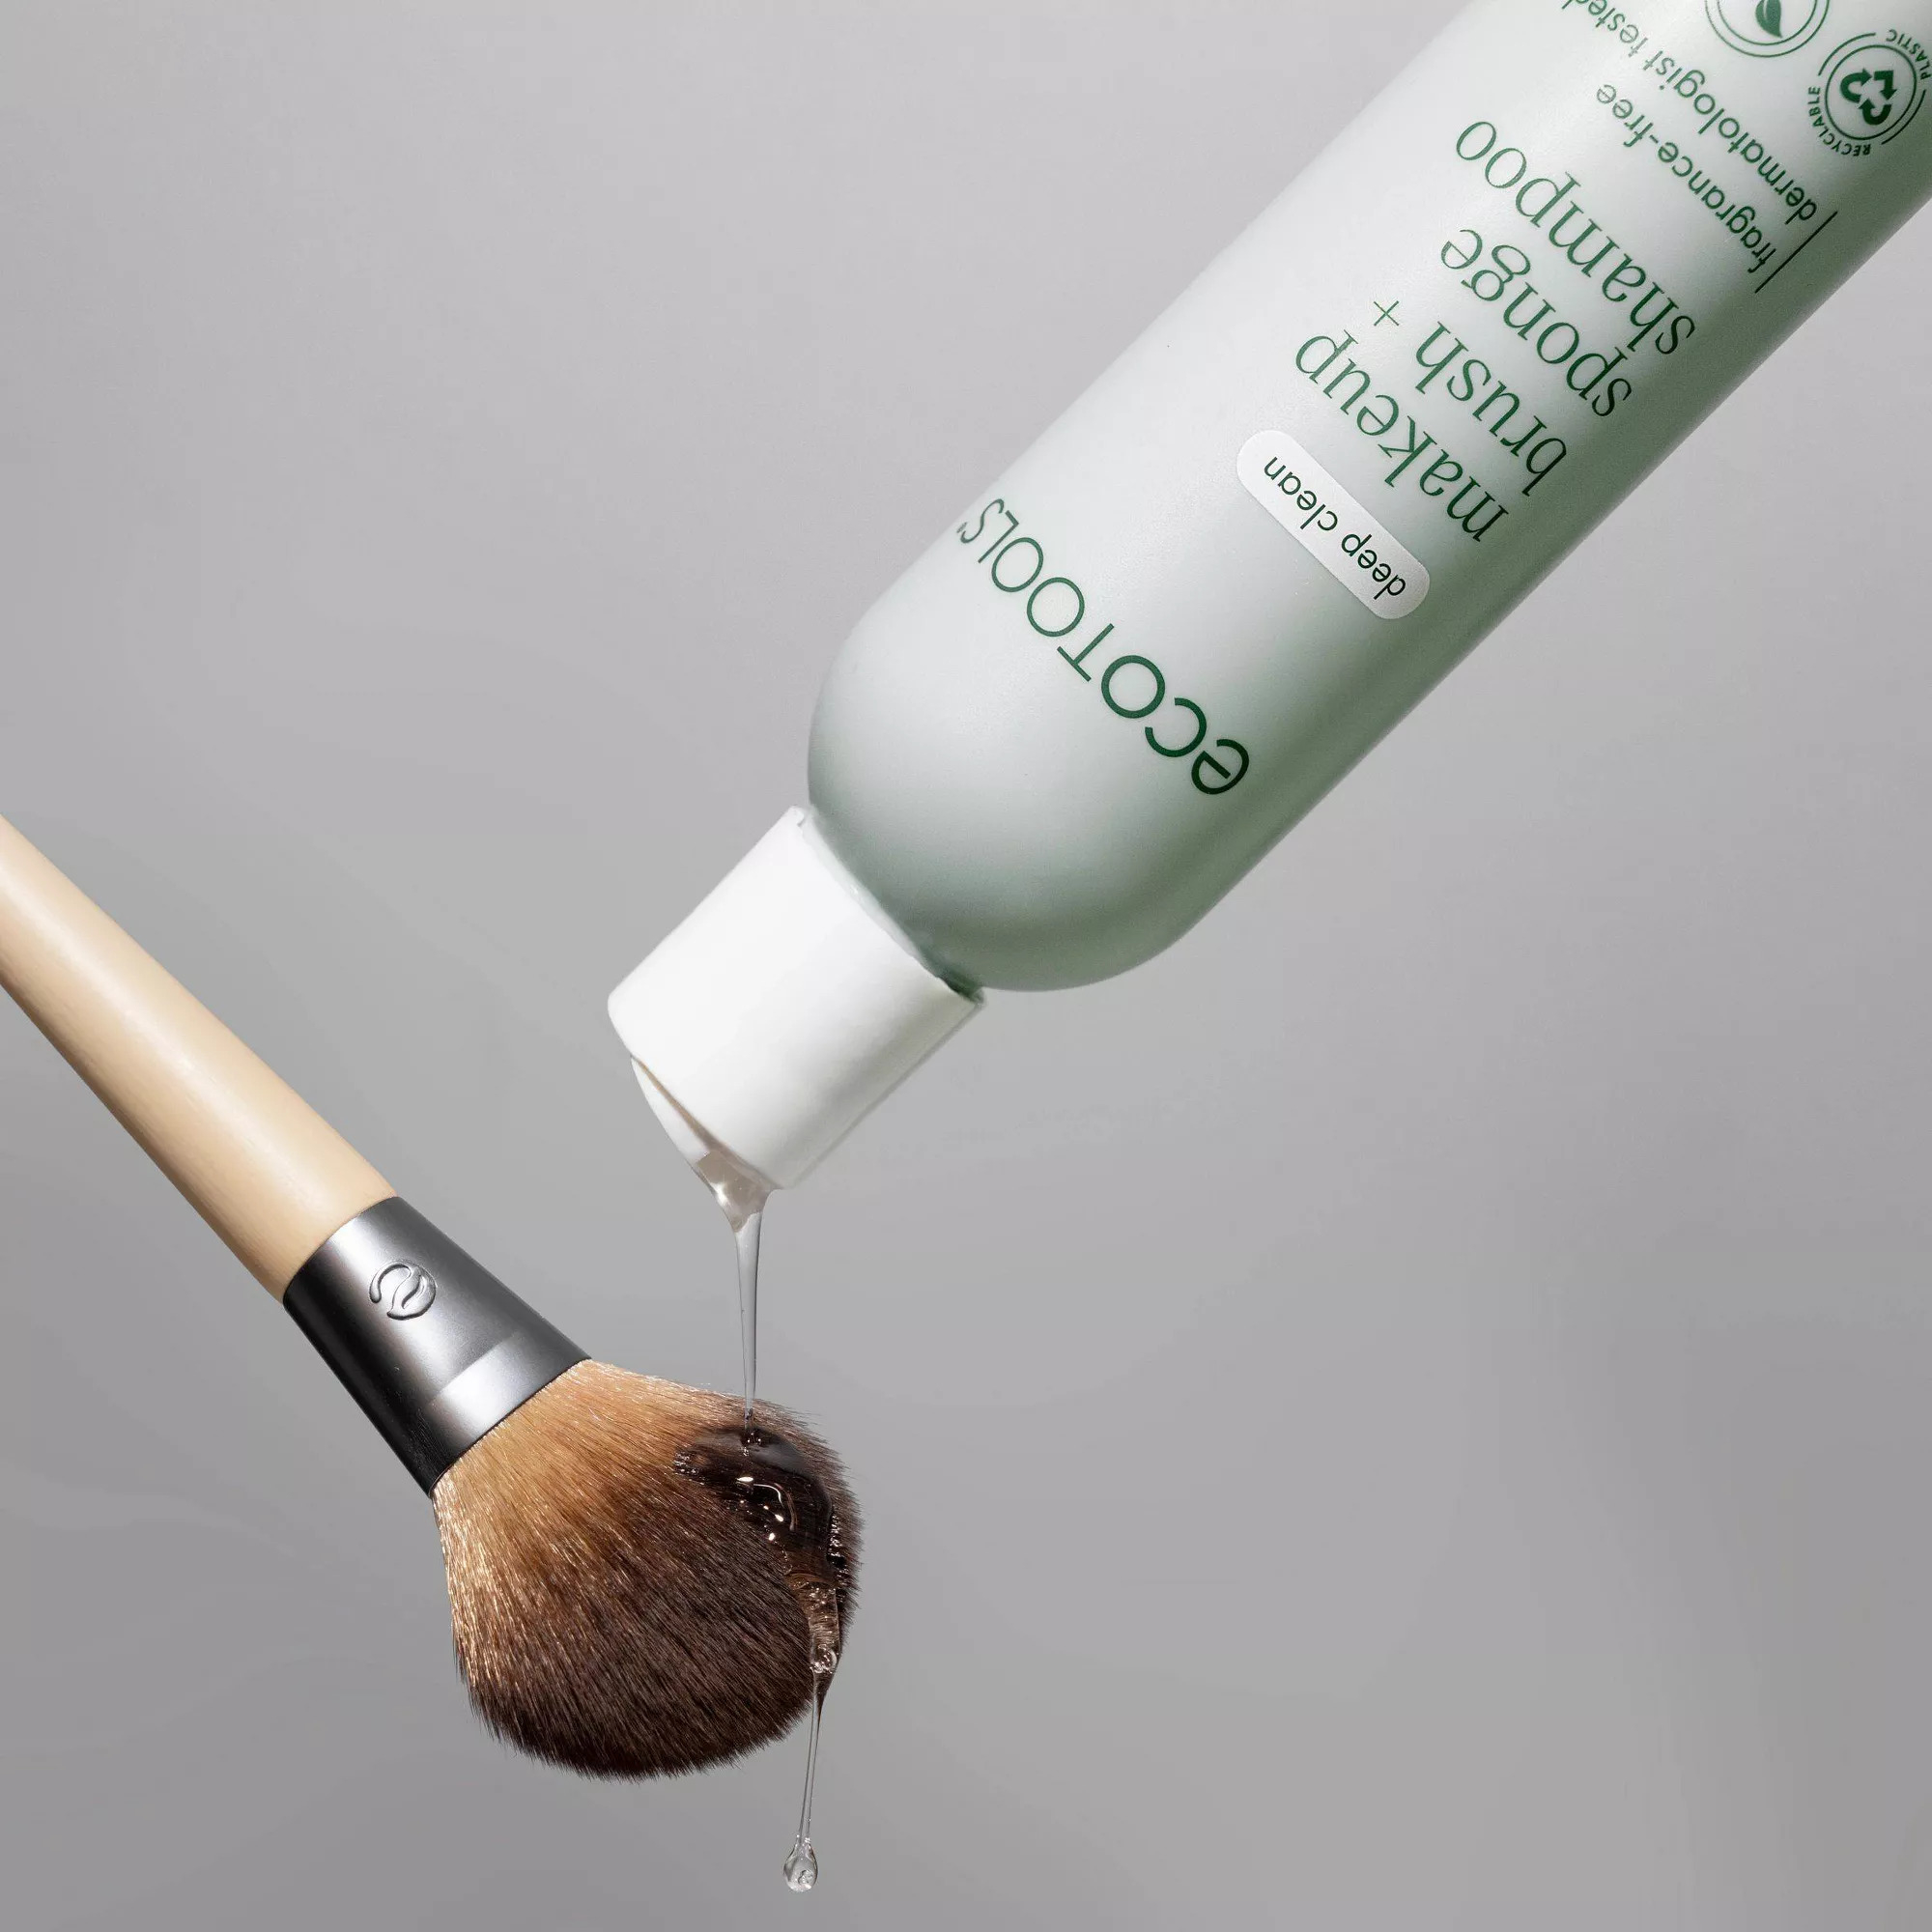 A bottle of Ecotools makeup brush shampoo with a small amount dripping onto a makeup brush